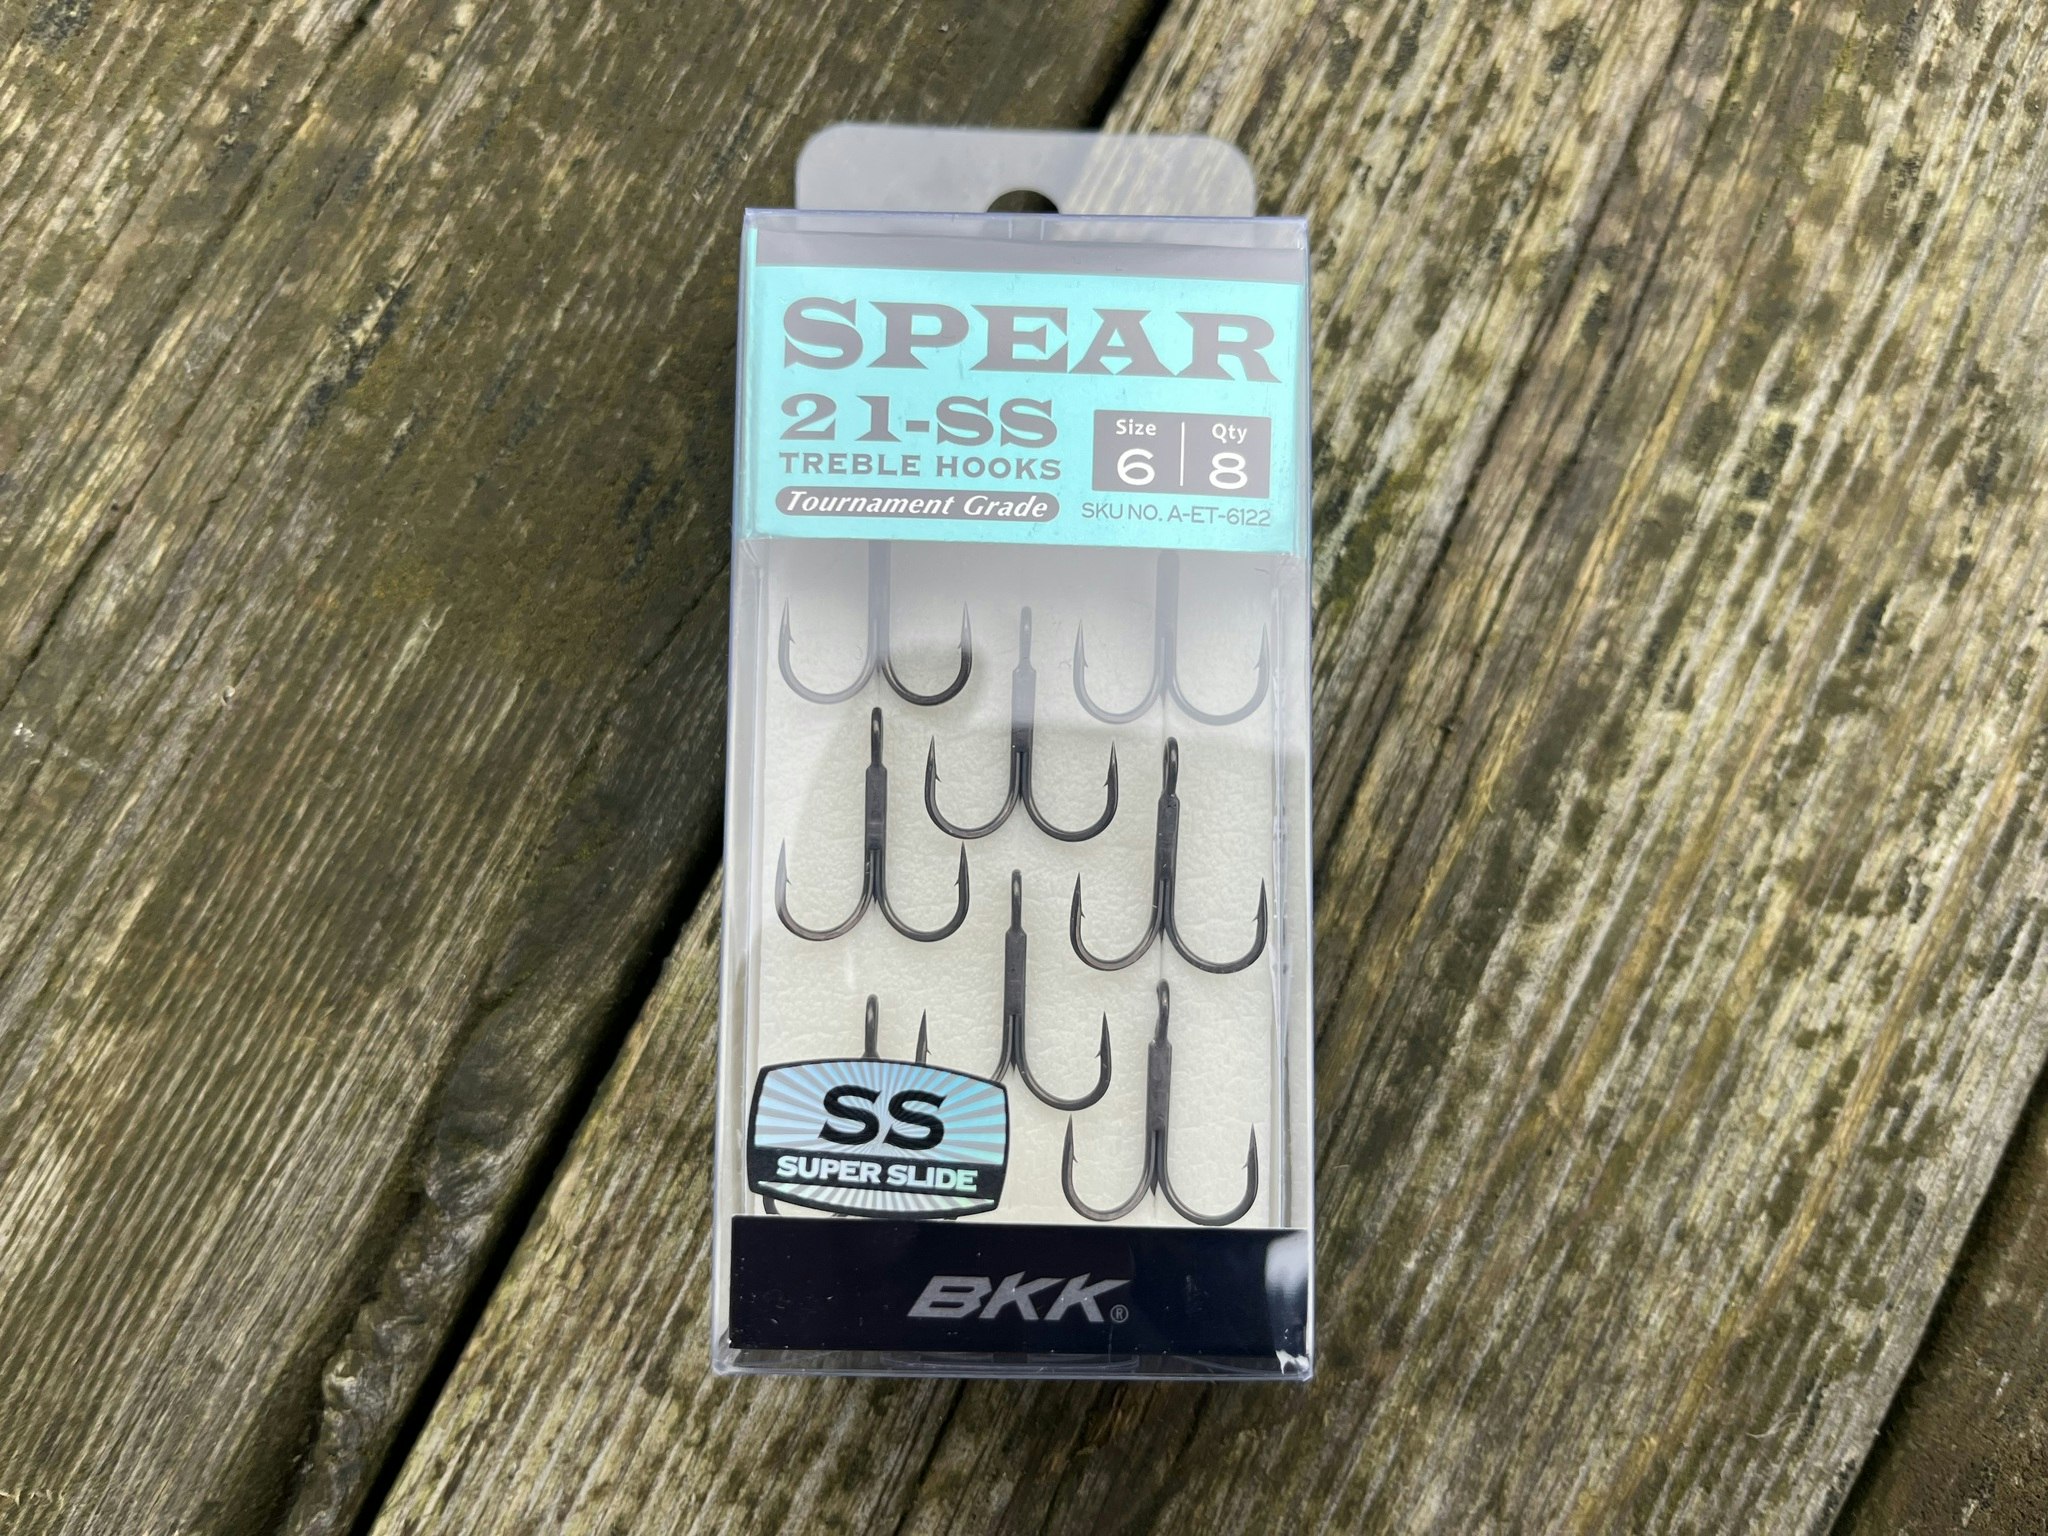 Spear 21-ss size 6